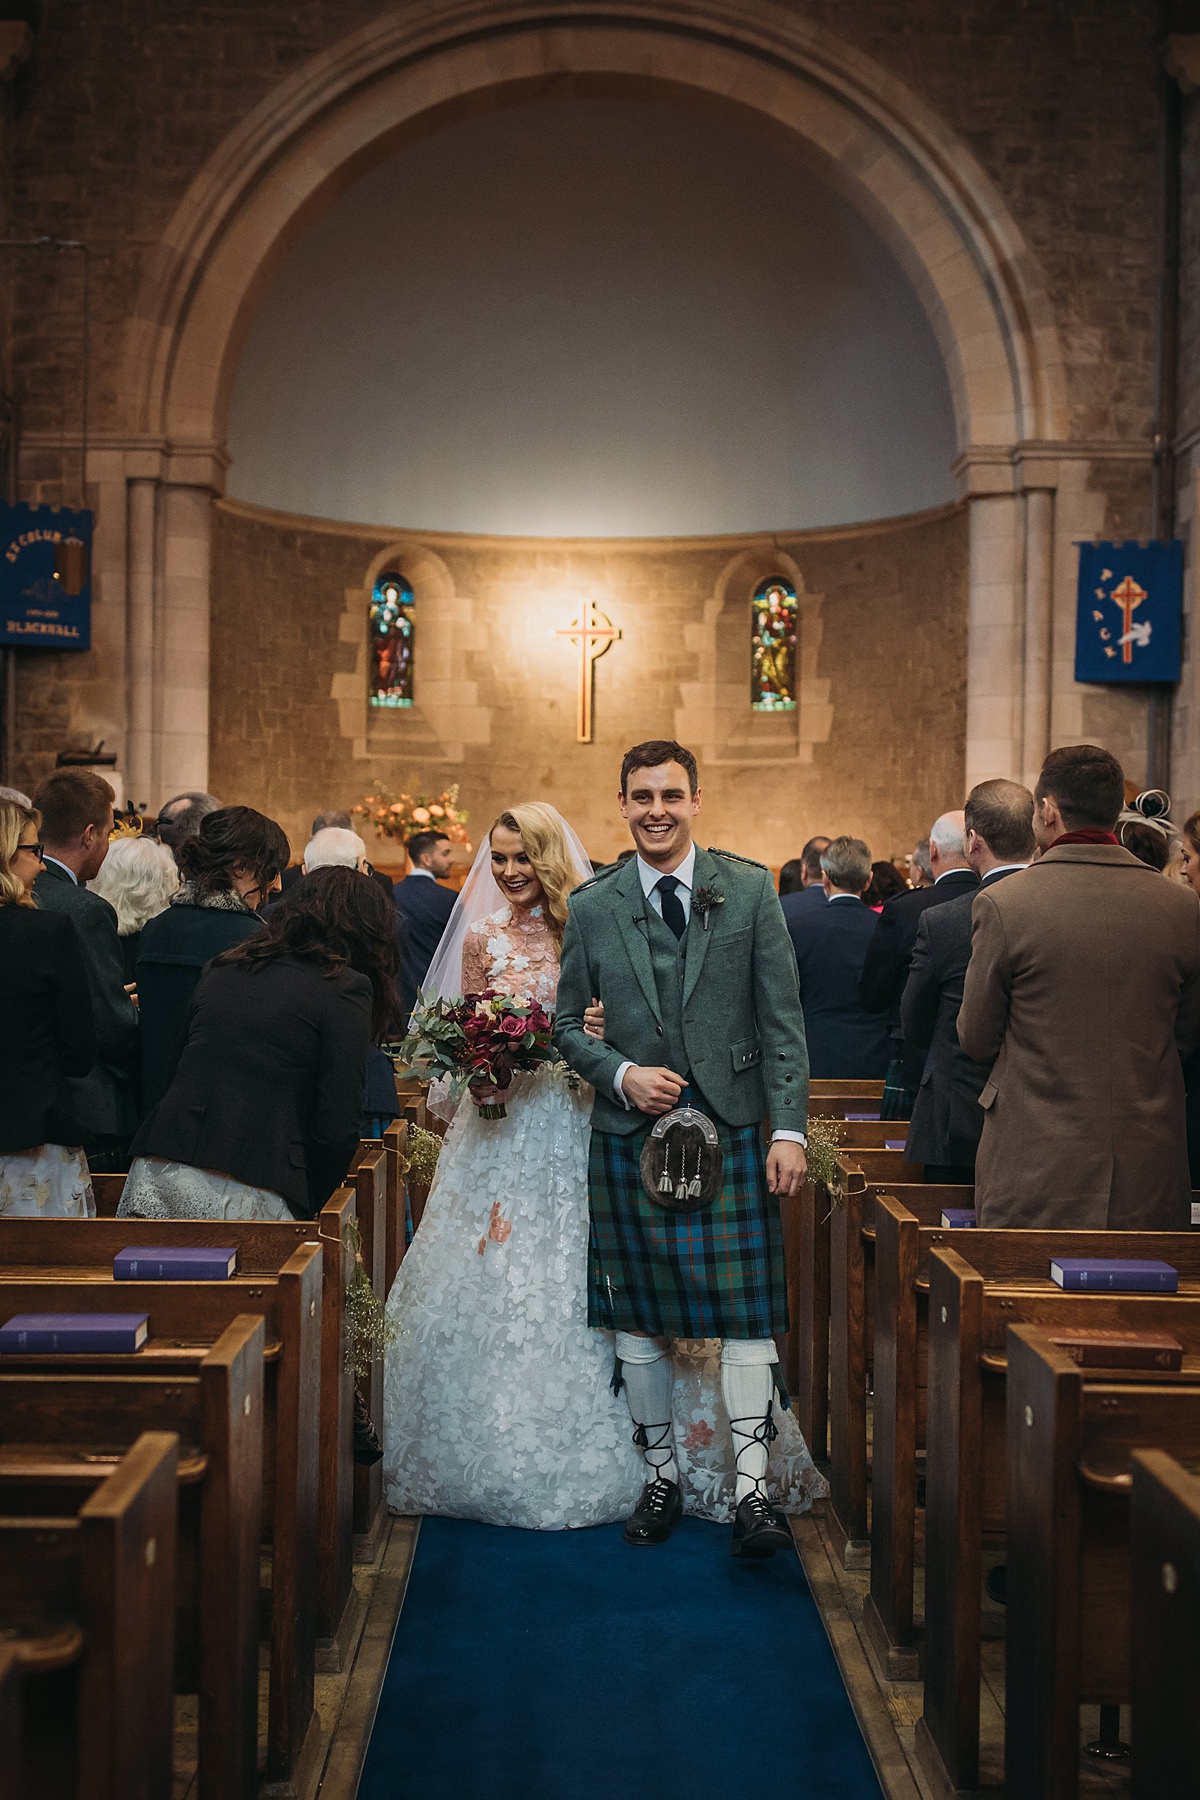 29 A Jesus Peiro dress with hints of peach for a Scottish castle wedding